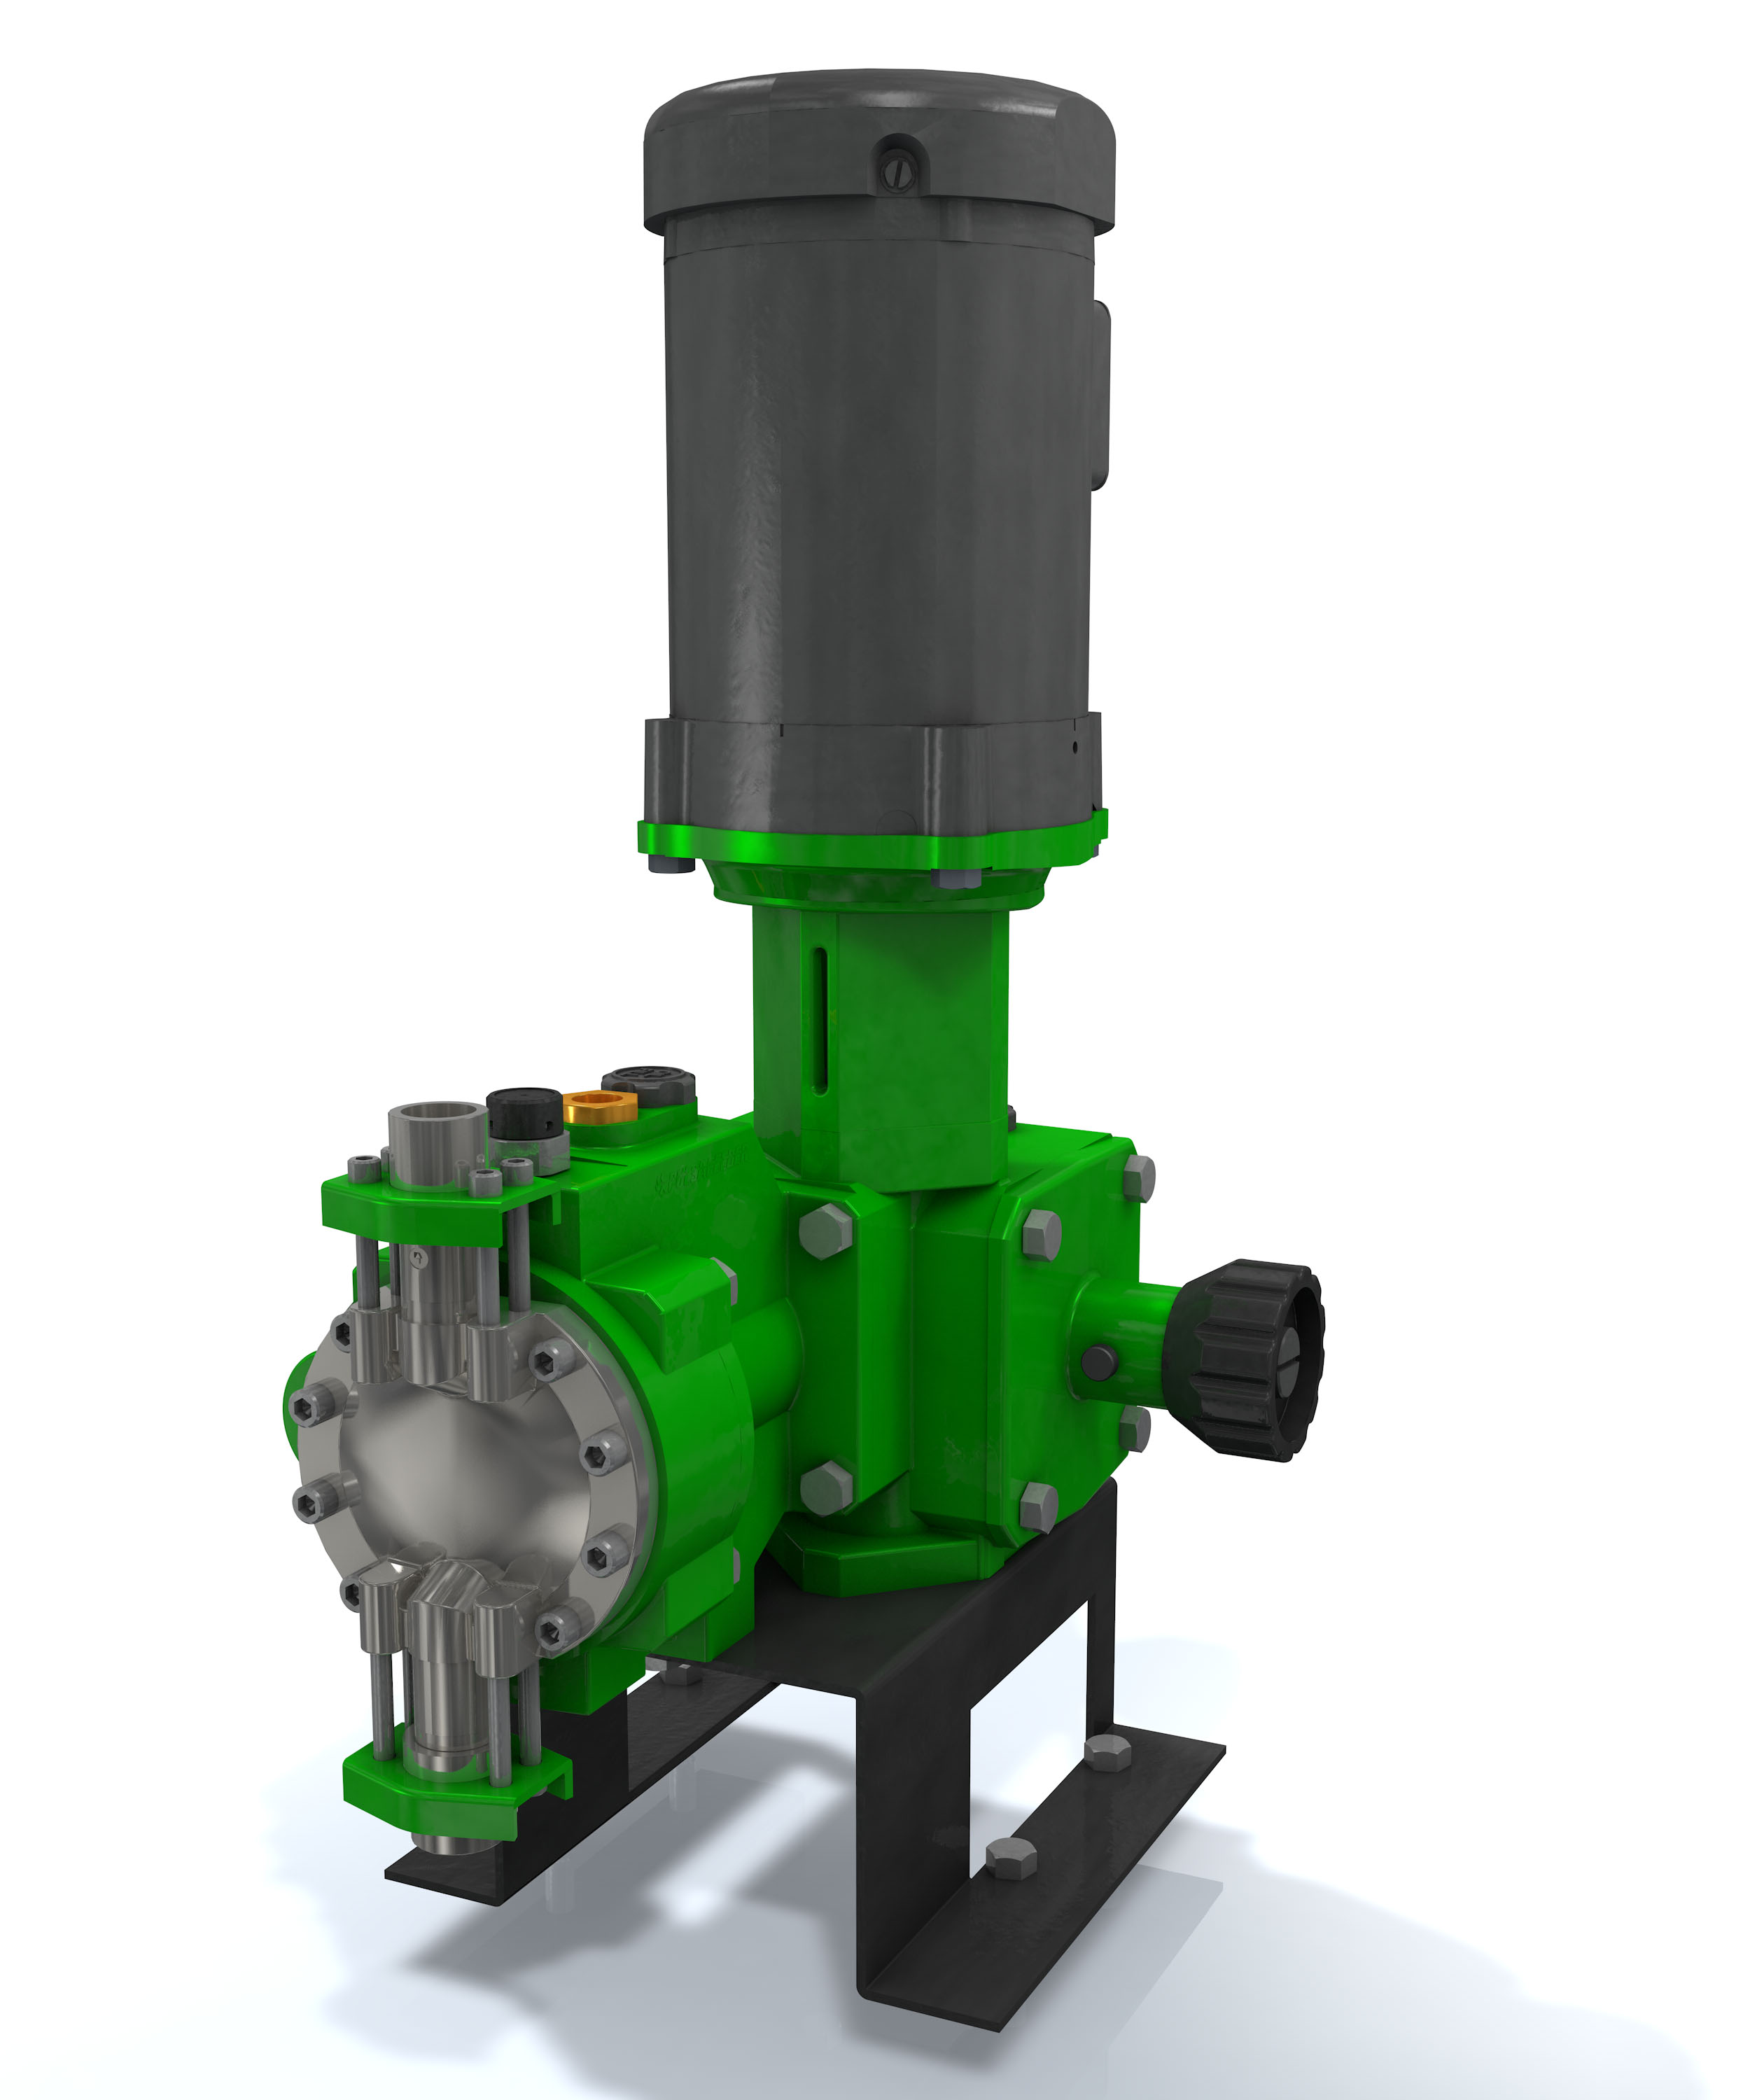 The Hypo Valve is designed to manage off-gassing in dosing applications.